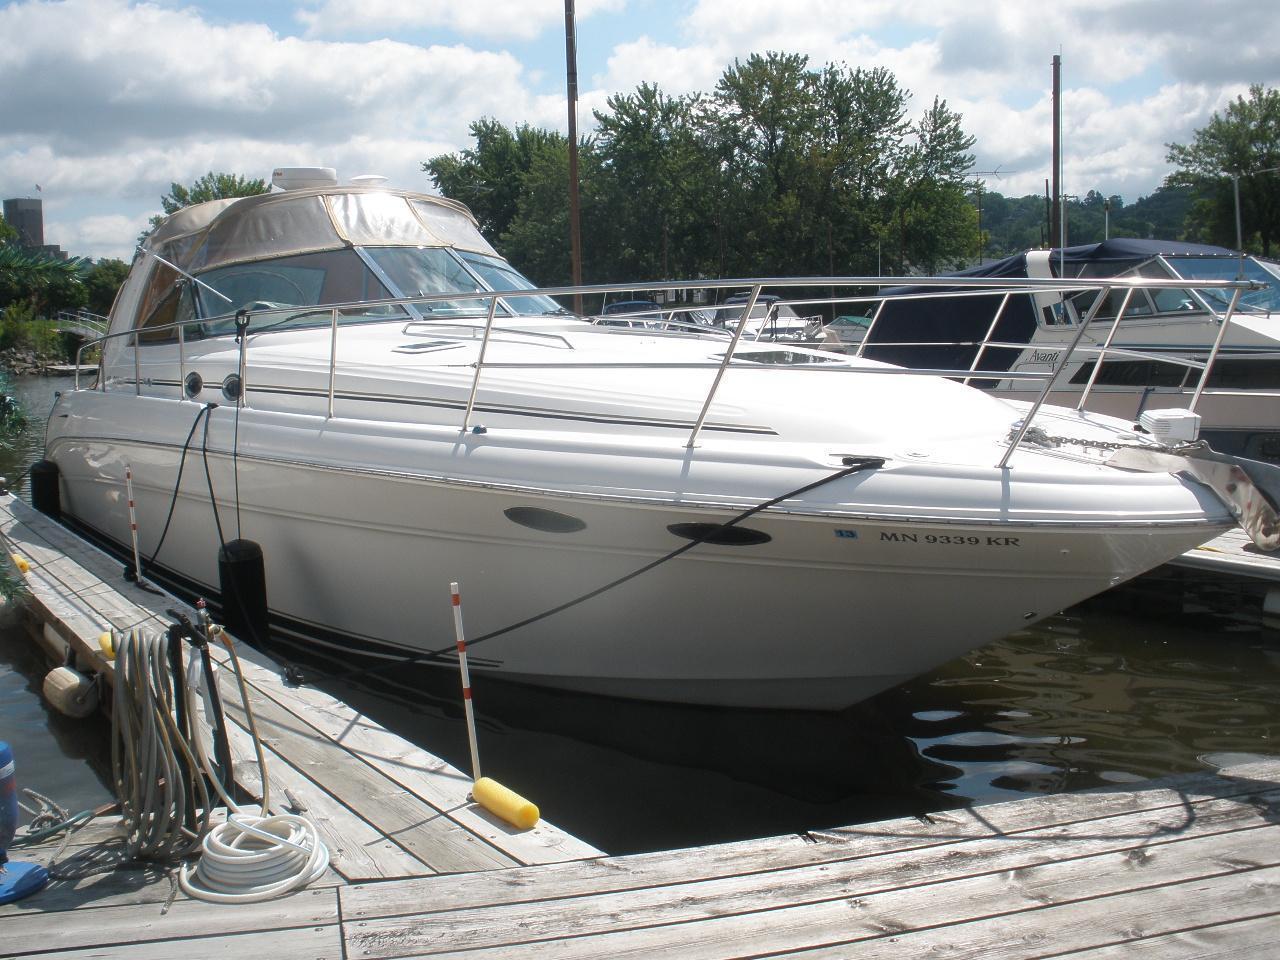 Sea Ray 410 Express Cruiser, Red Wing